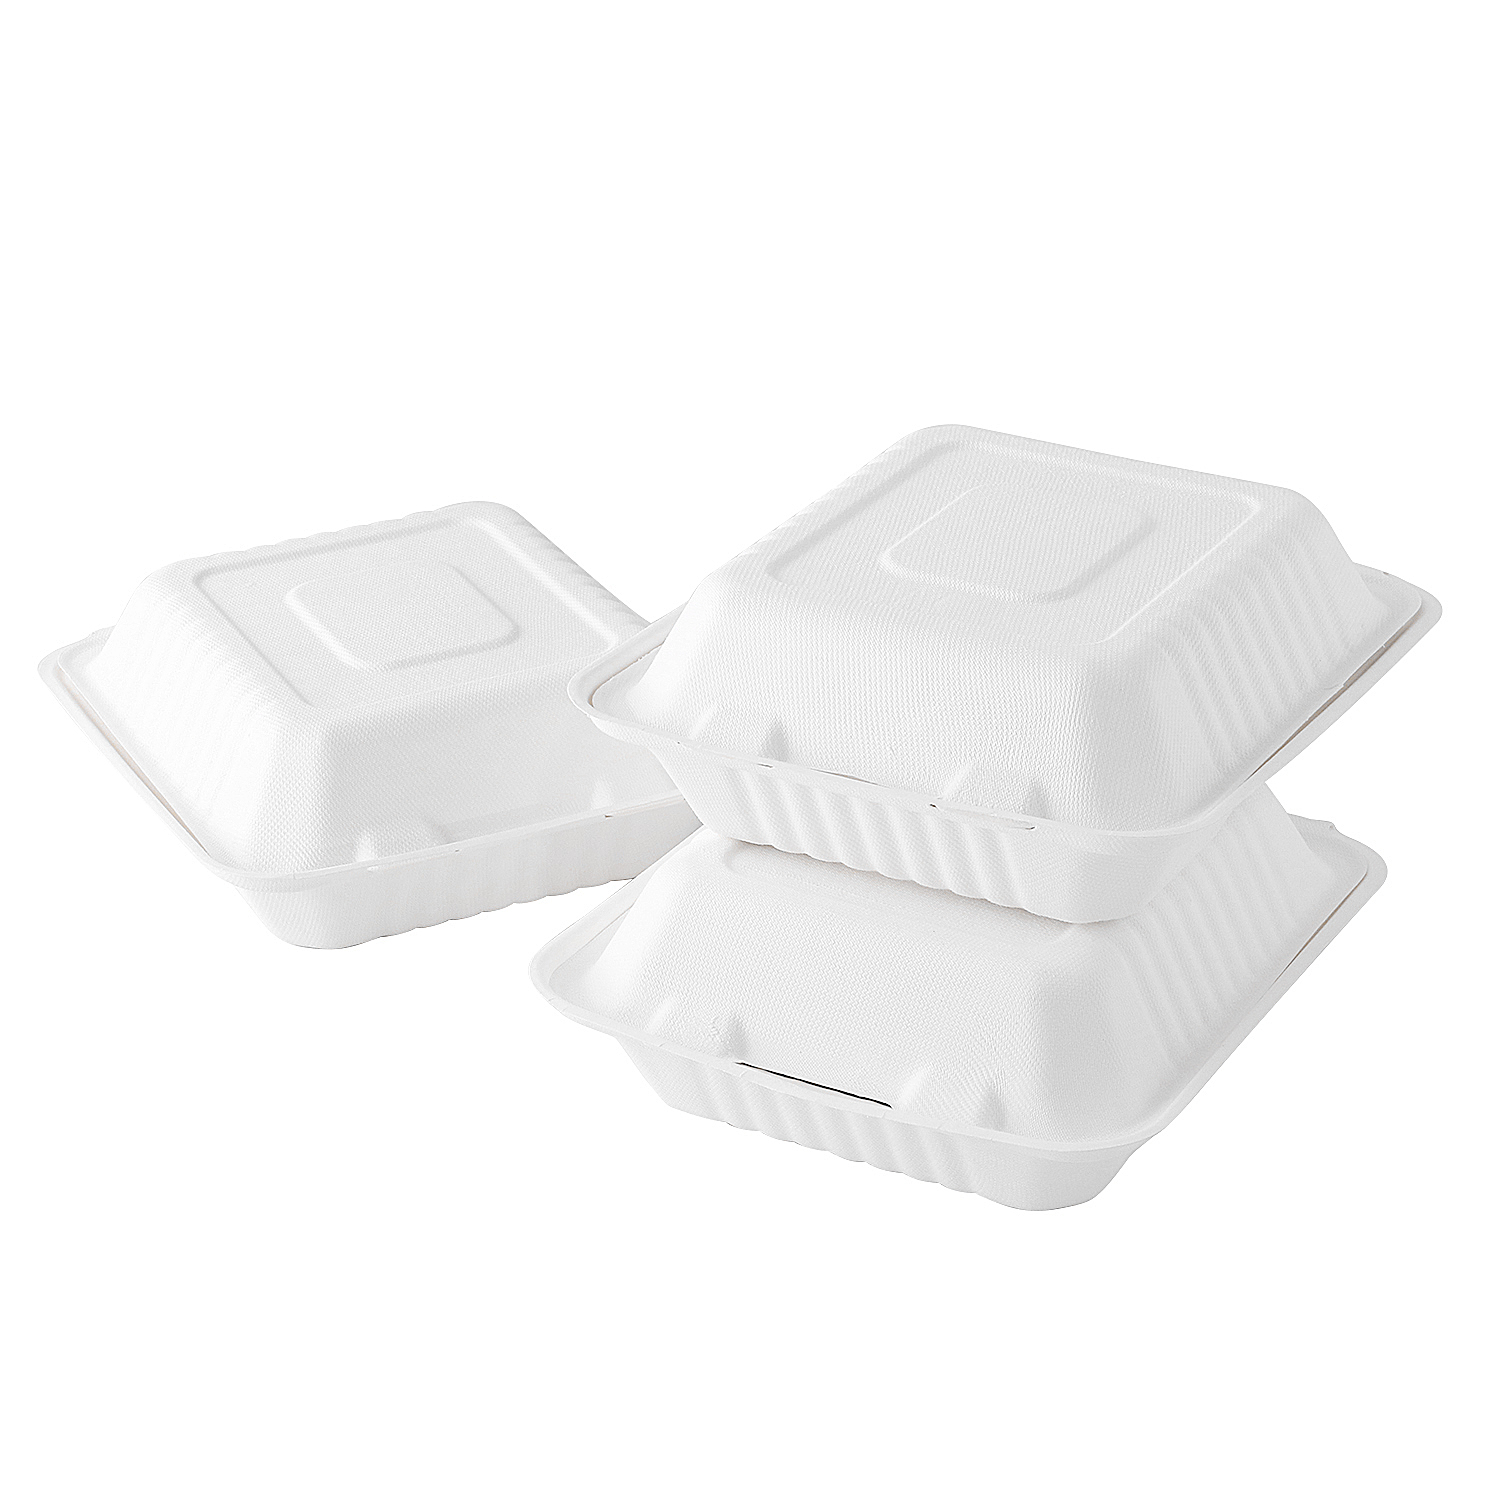 8"x8" x3'' Recyclable Bagasse Fast Food Clamshell Box